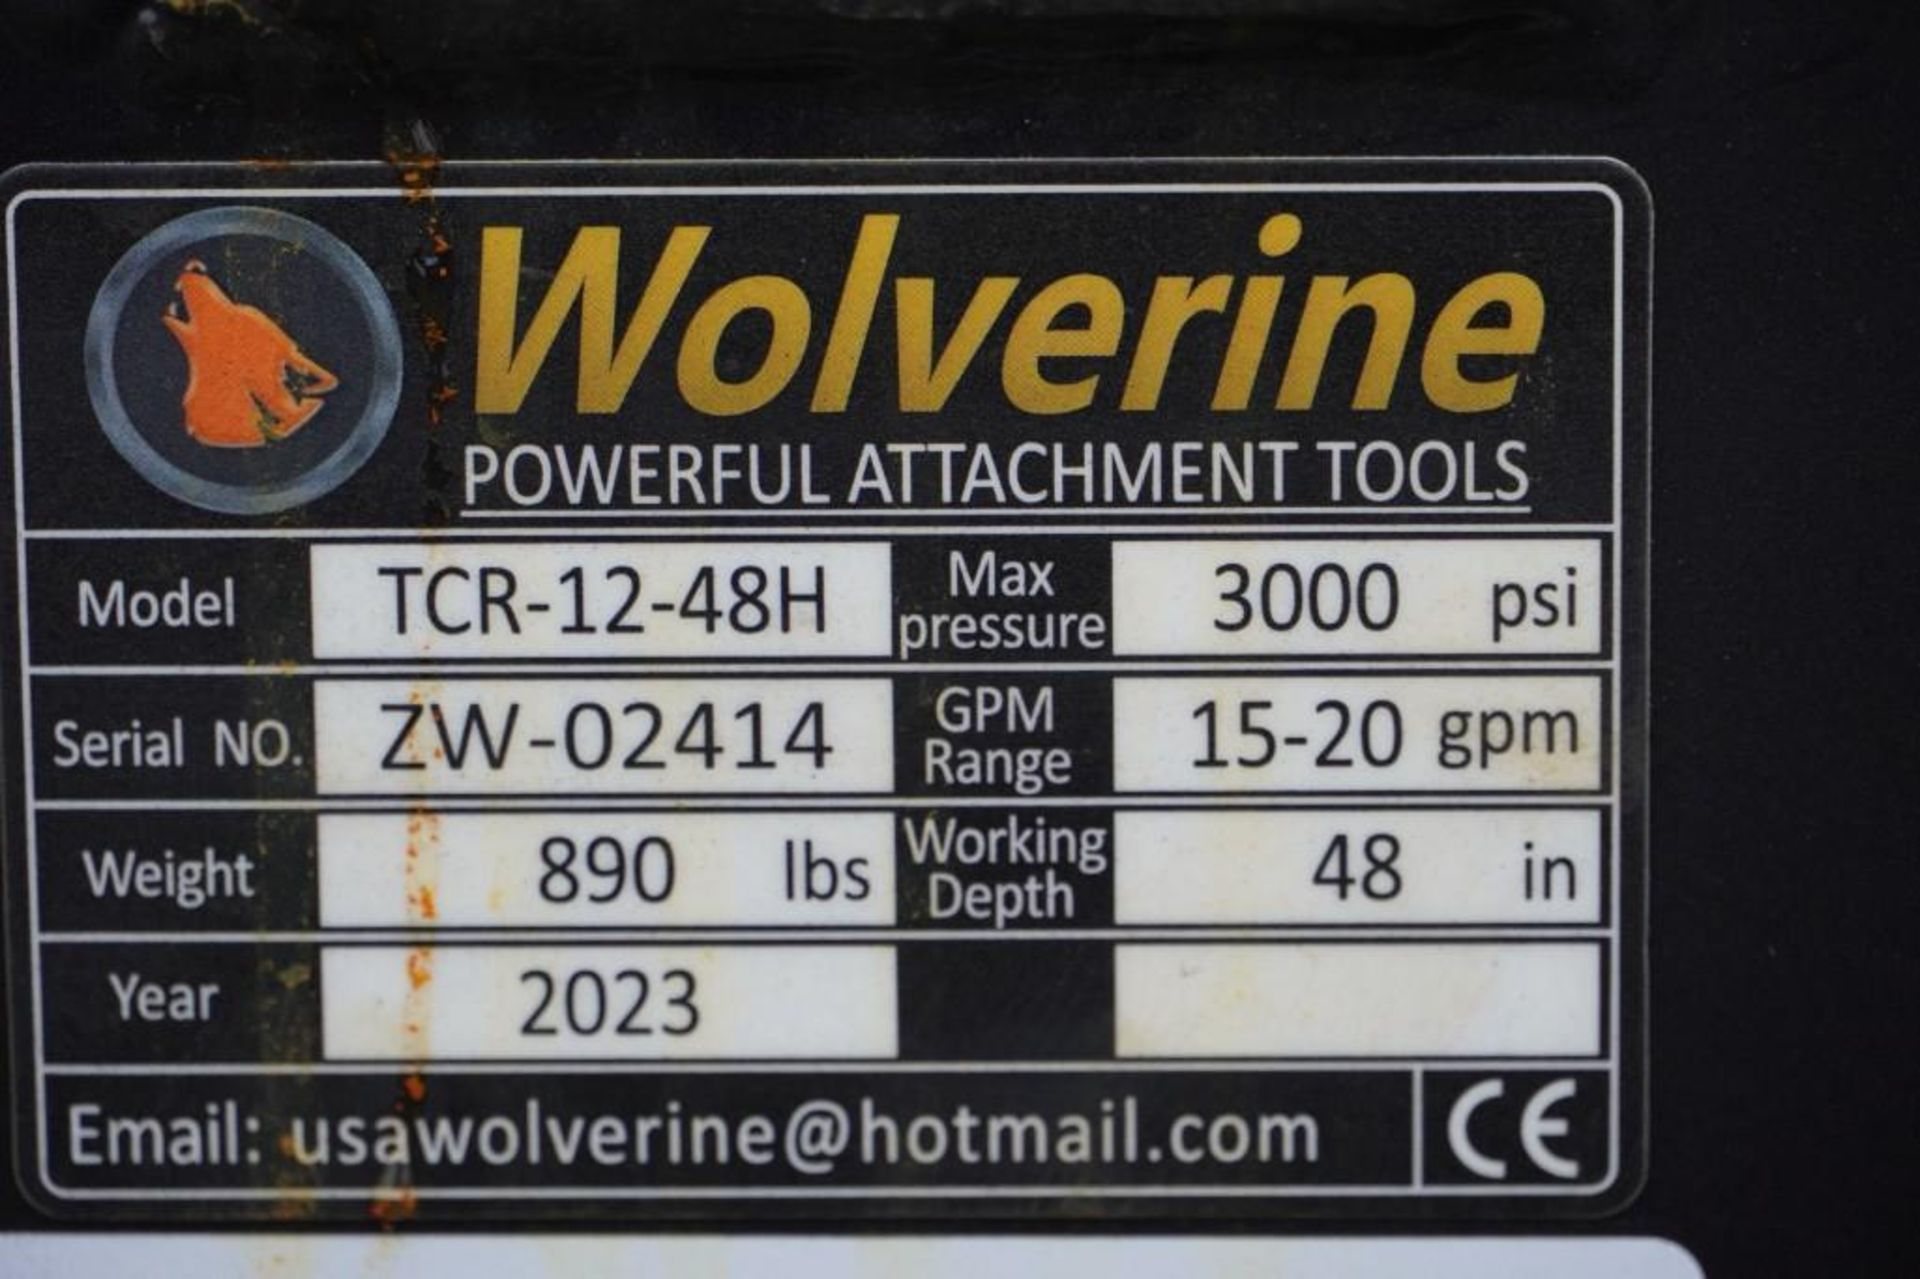 New! 2023 Wolverine Skid Steer Trencher Attachment - Image 5 of 5